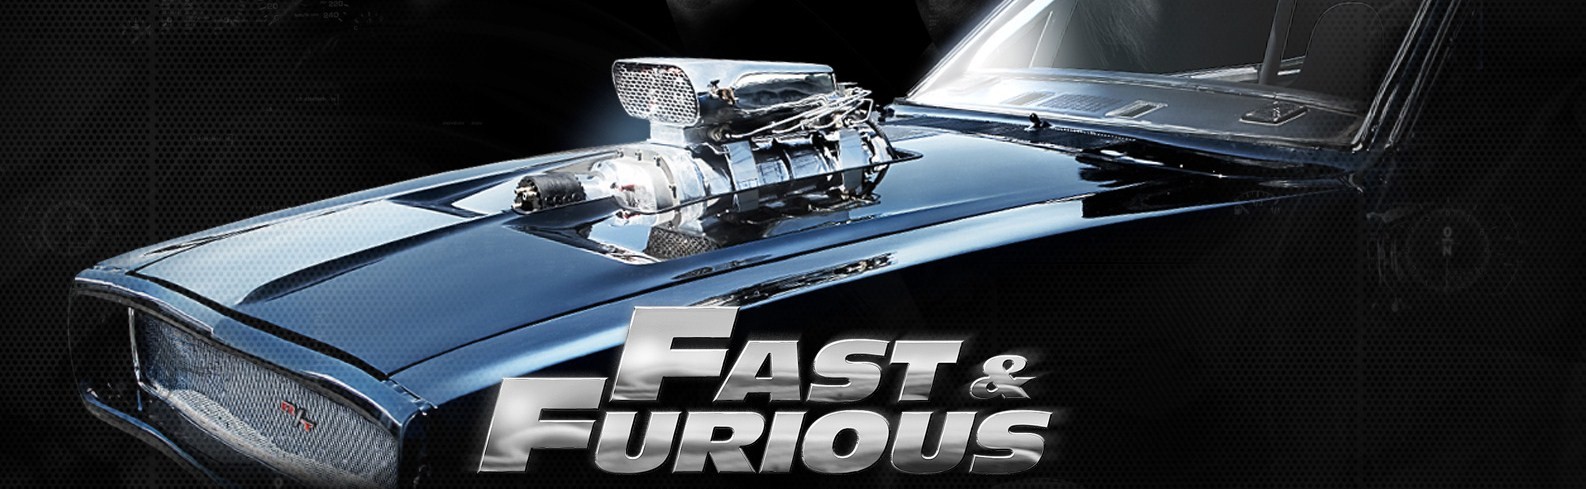 vin diesel car fast and furious. vin diesel fast and furious 1.